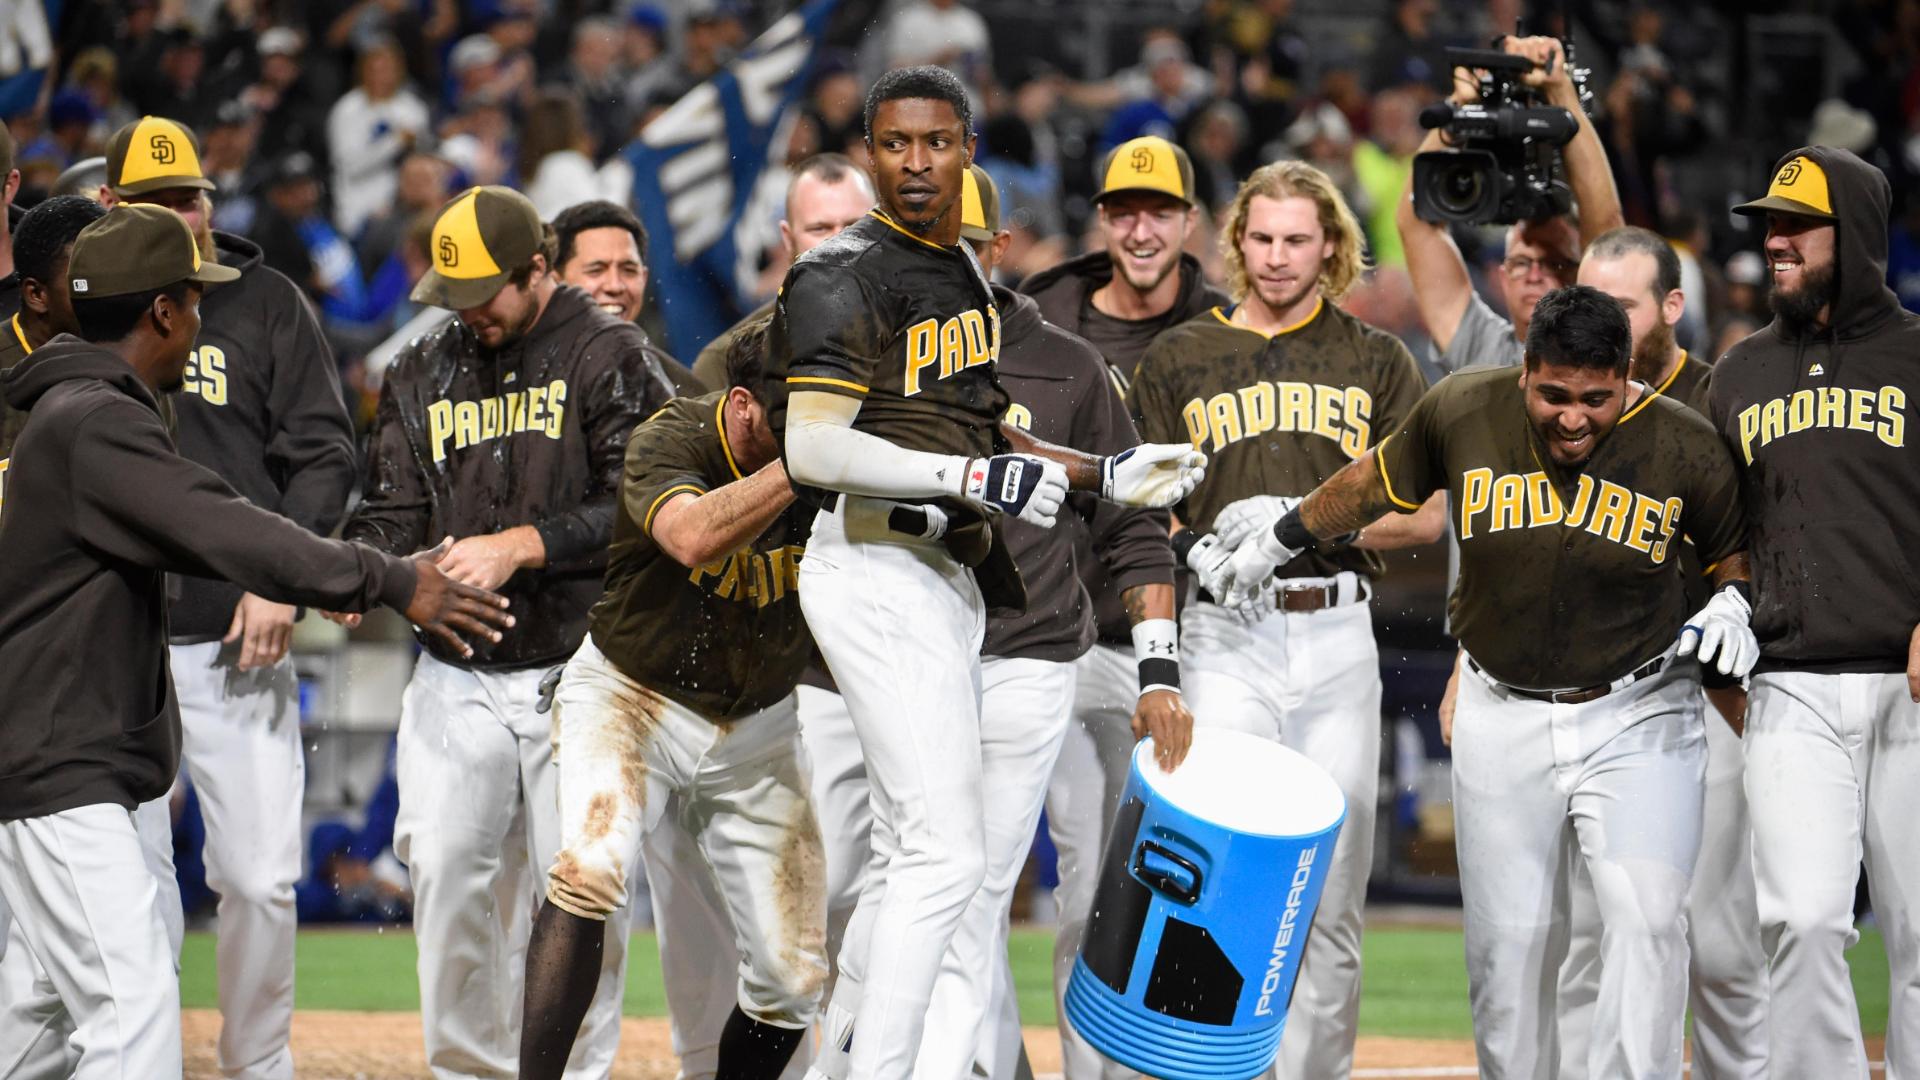 Upton homers in ninth to lead Padres past Dodgers 7-6